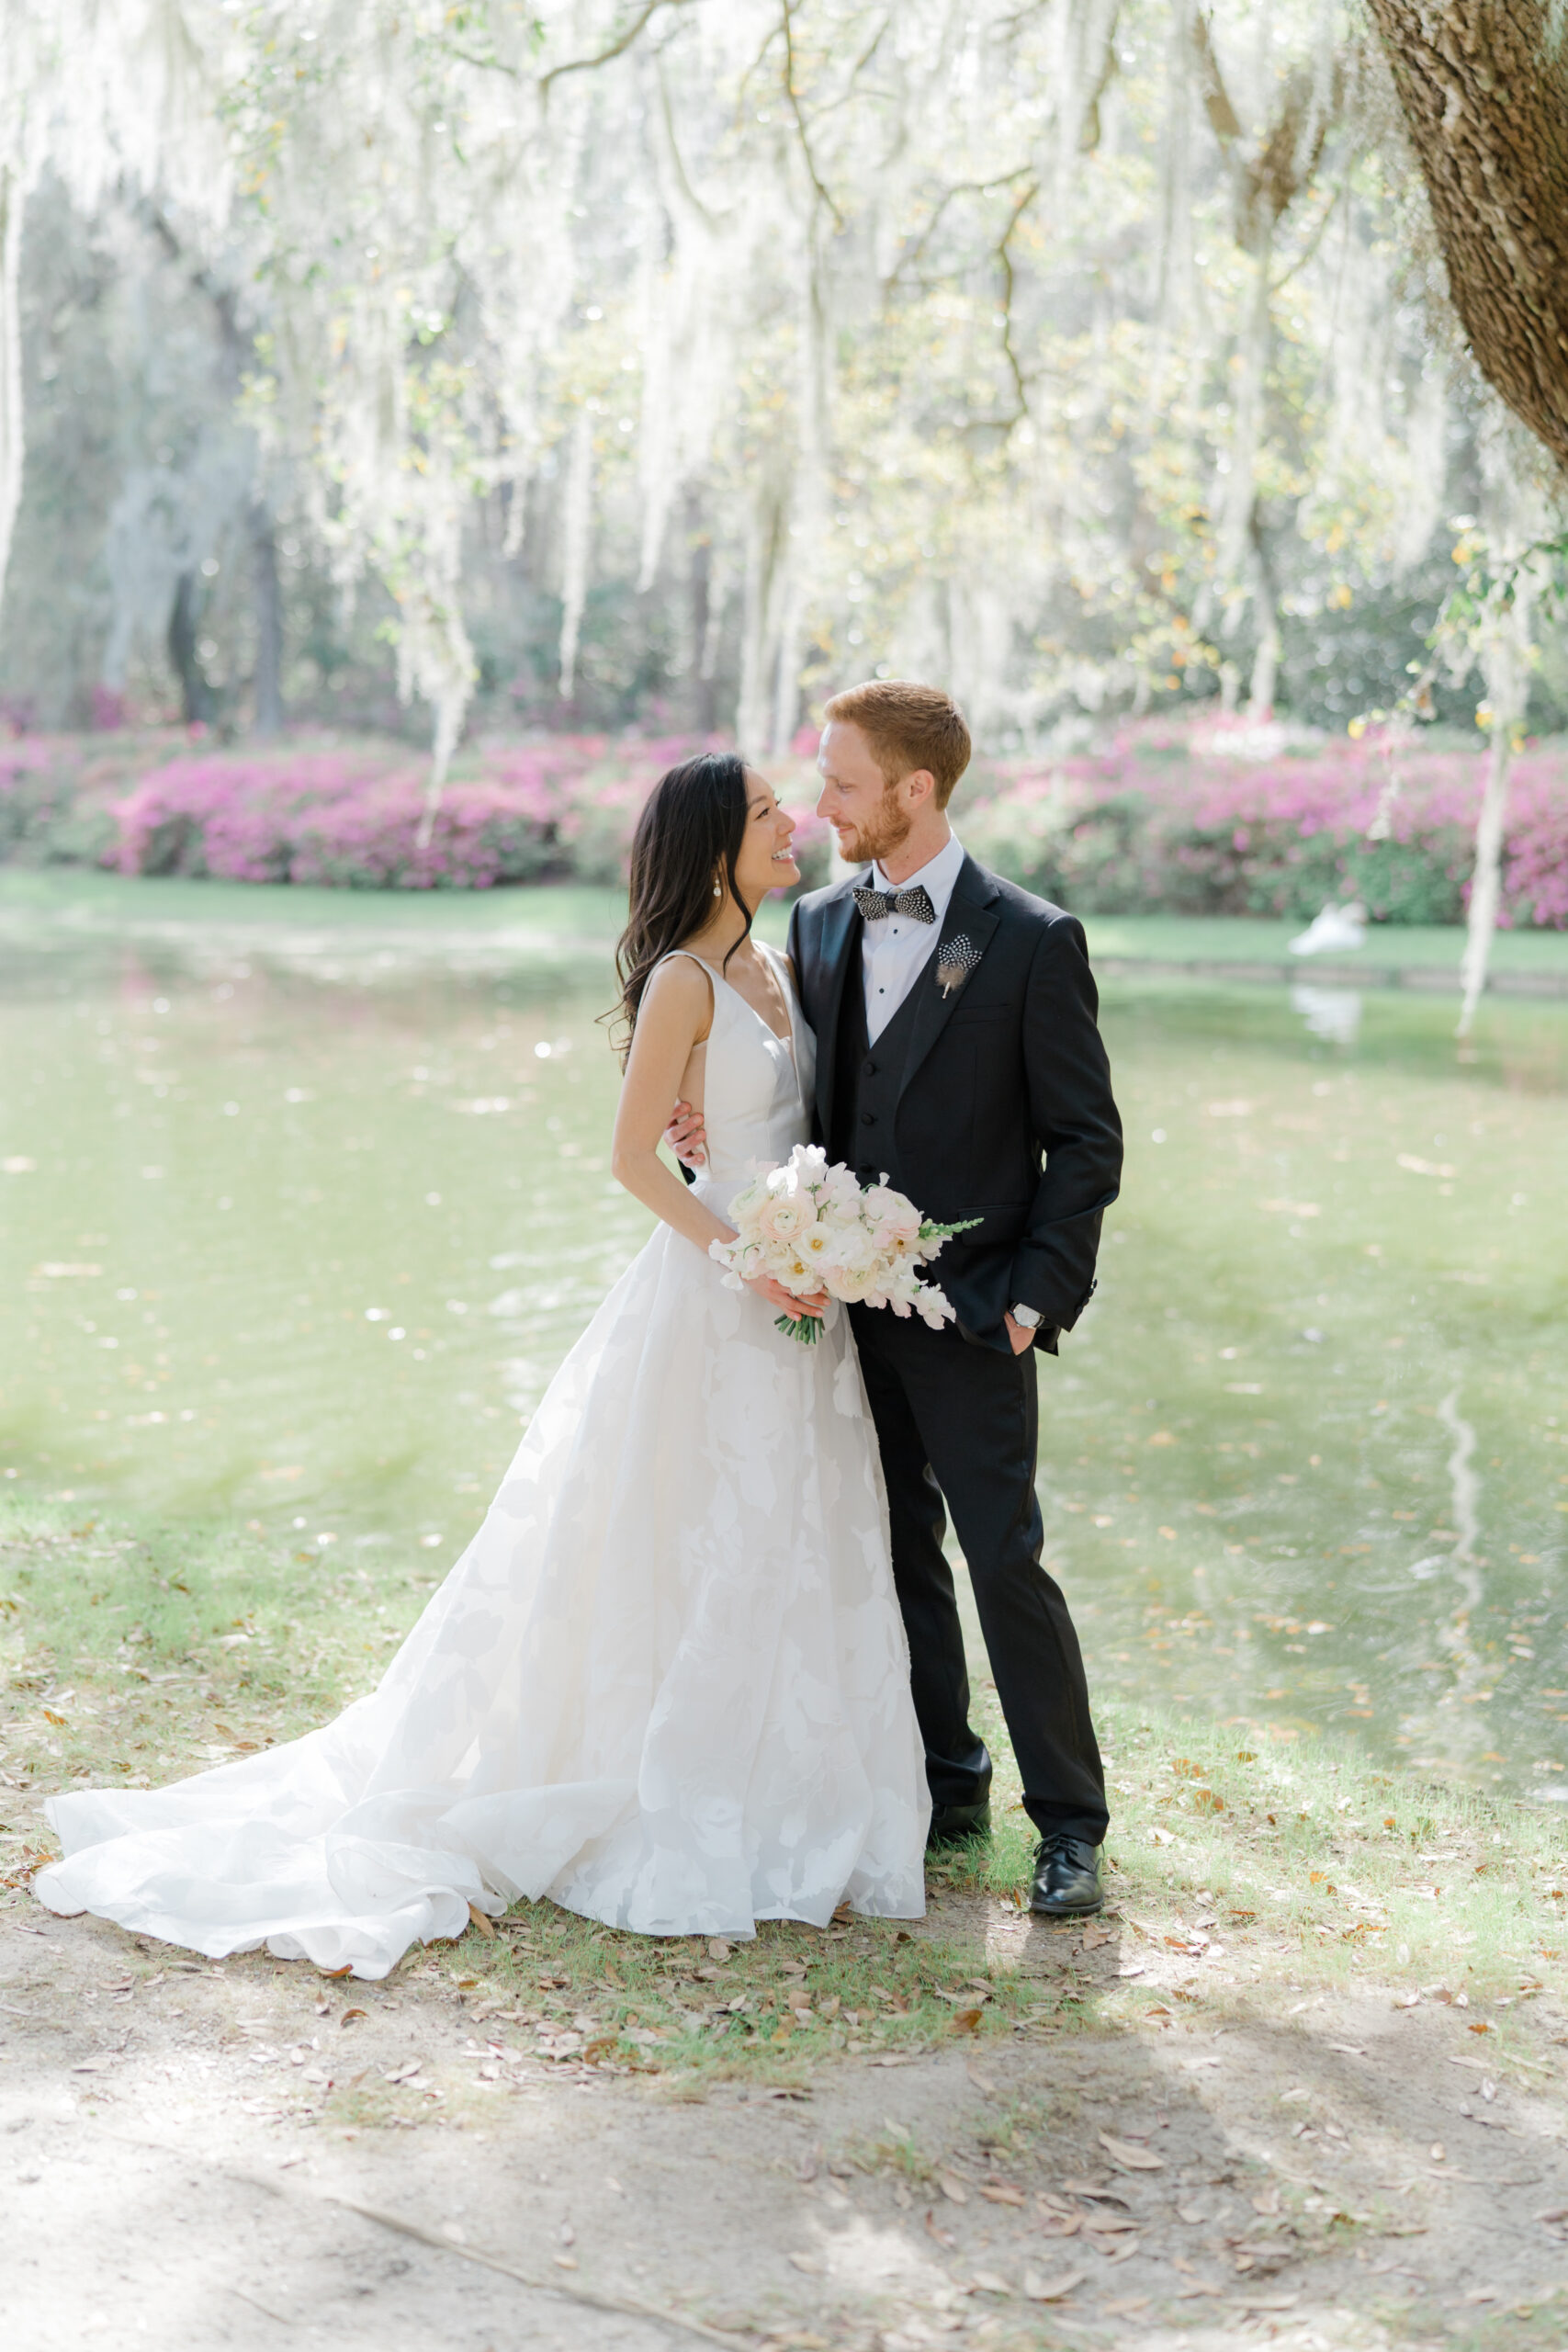 Bride and groom portraits by the pond at Middleton Place with pink azalea blooms in the background.